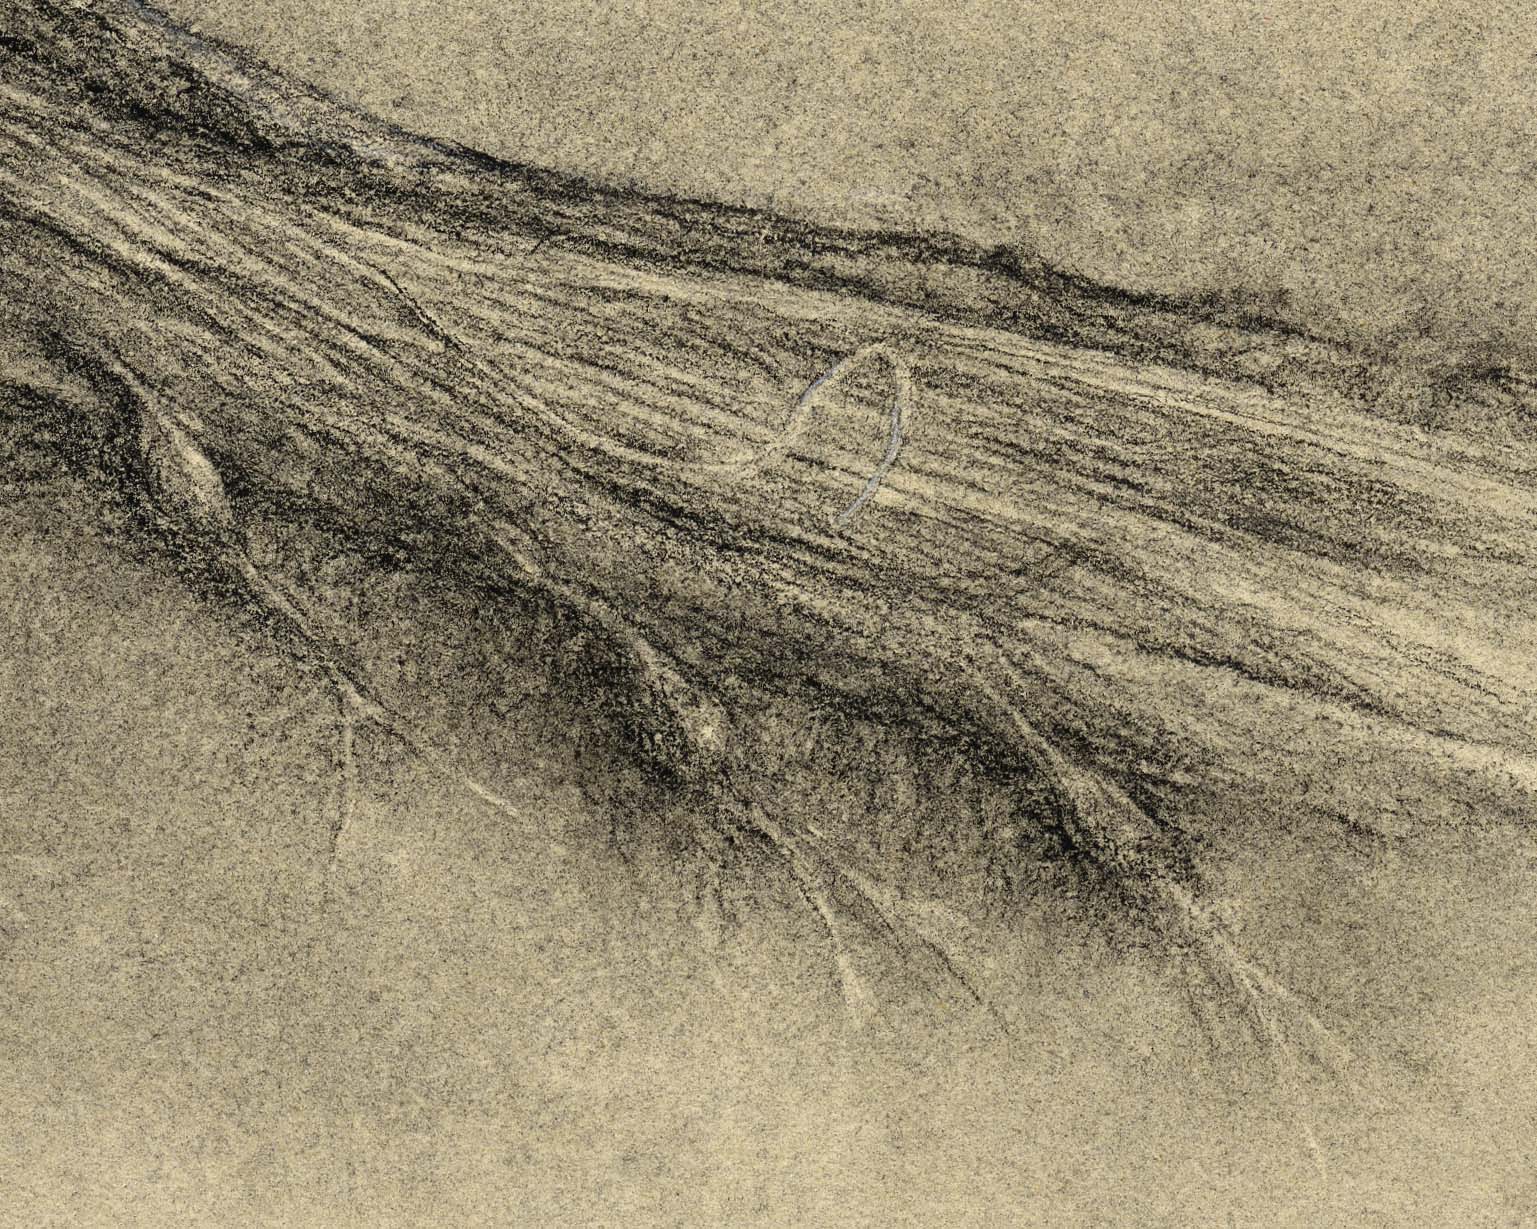  Spinal cord (cauda equina) with nerve roots (large detail) 